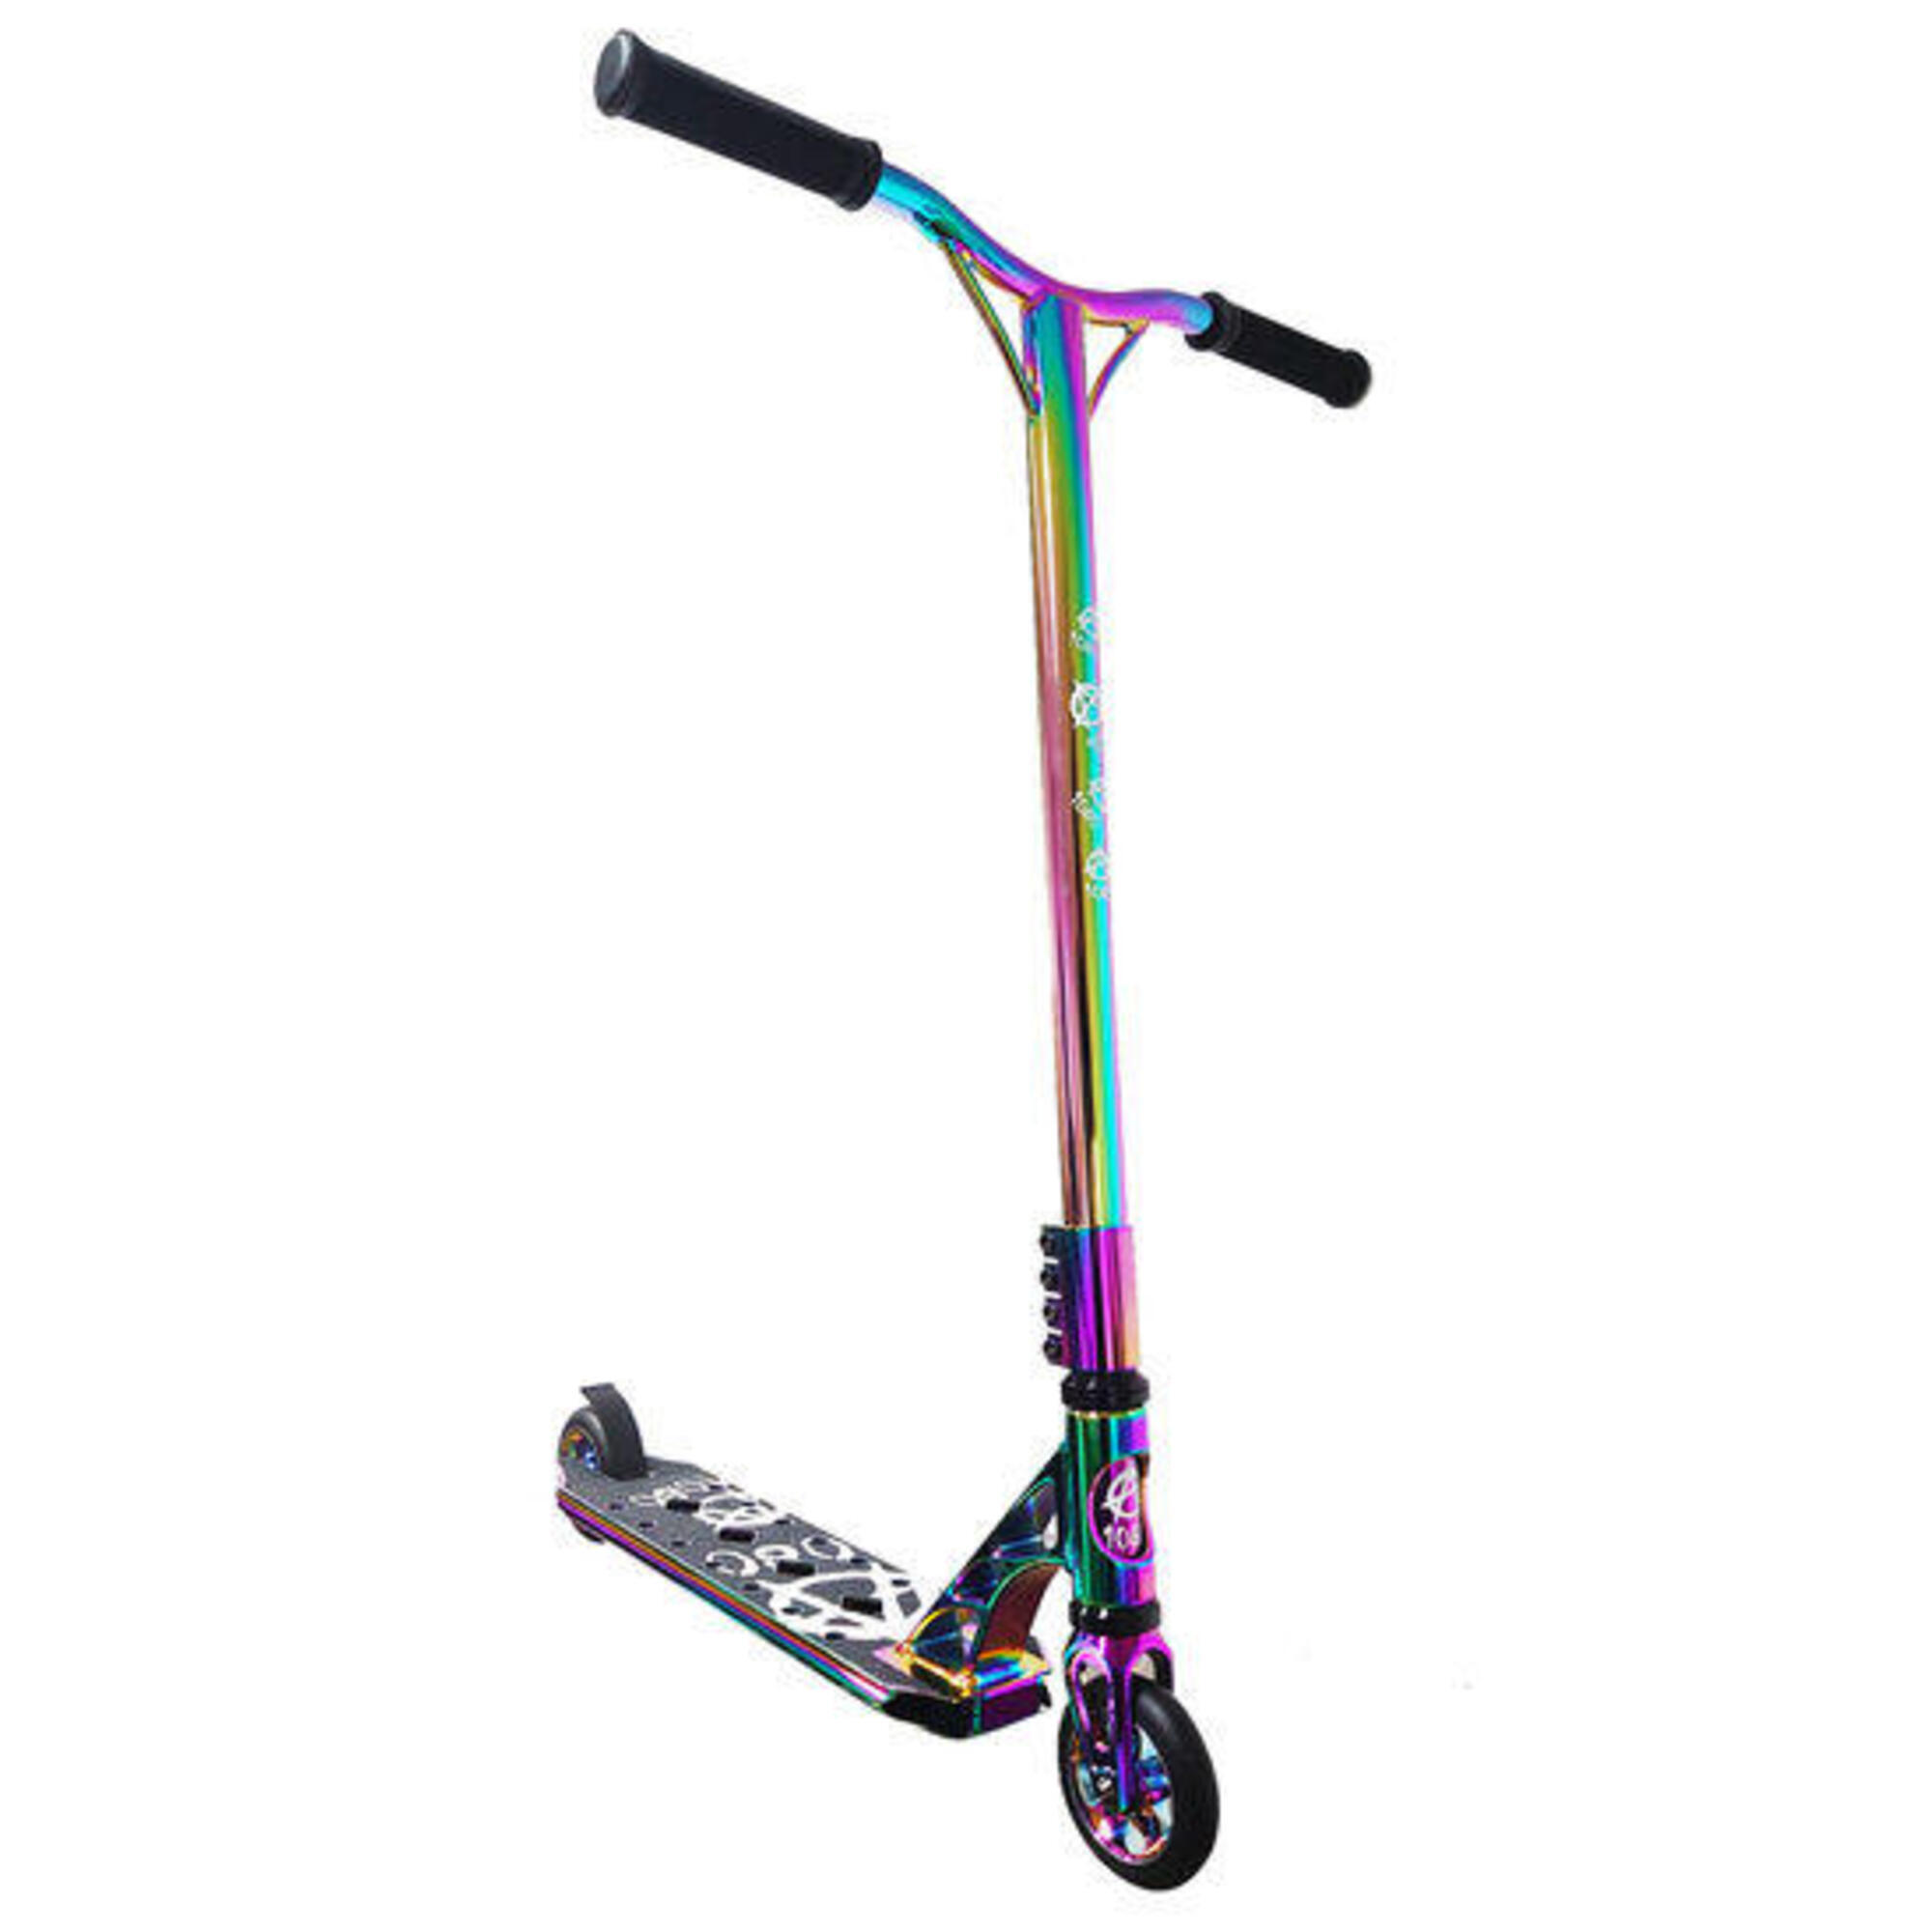 XN 1080 NeoChrome+ Push Stunt Scooter, Limited Edition - Neo Chrome Jet Fuel